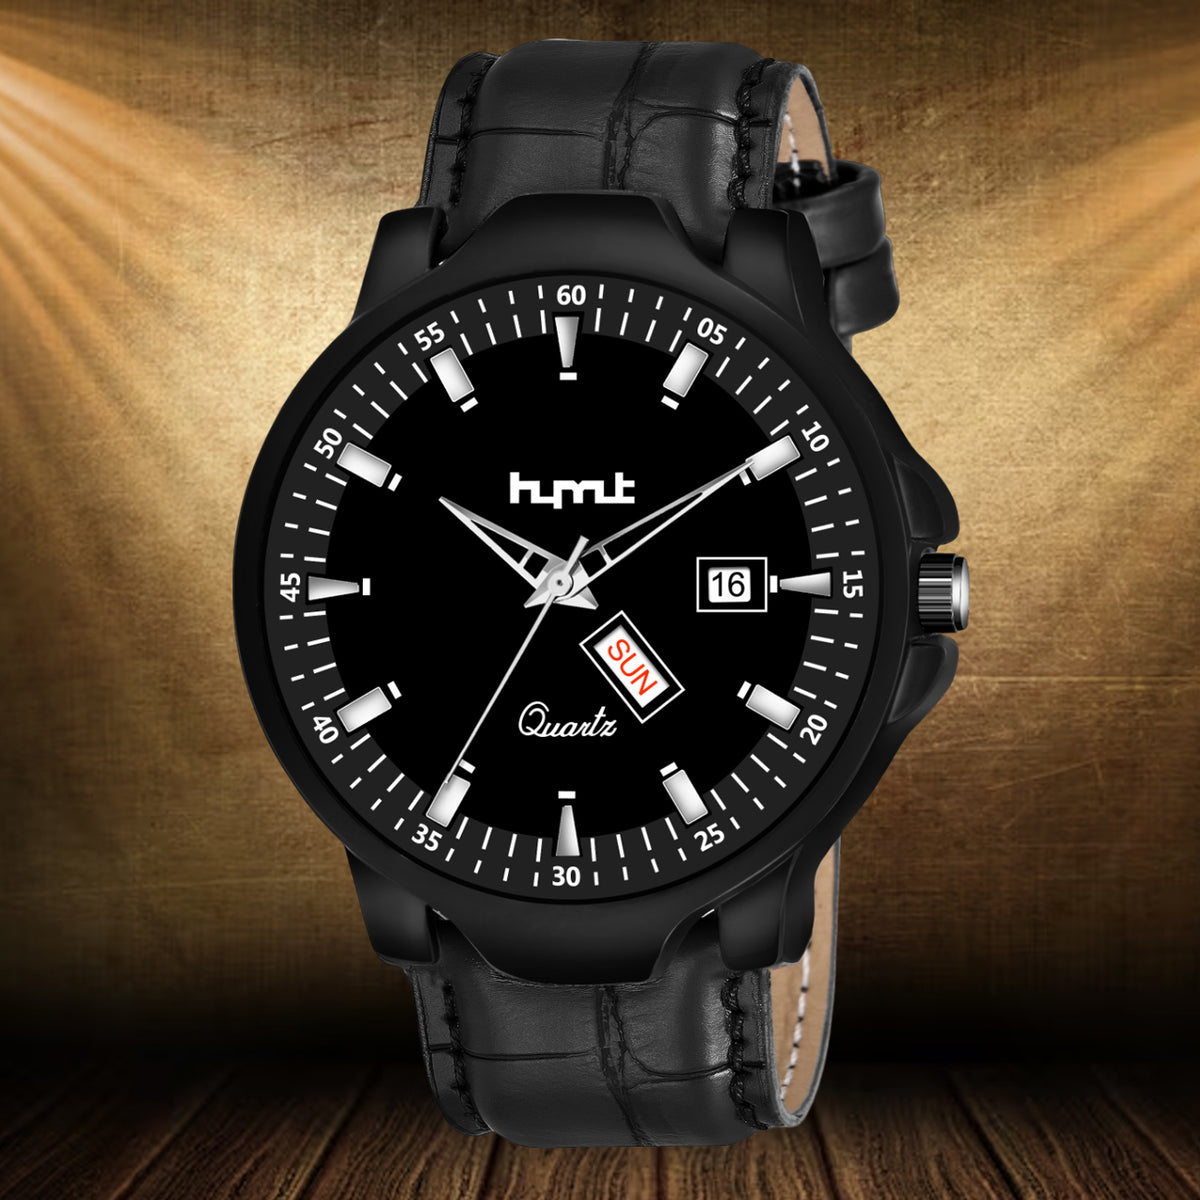 HYMT  DAY & DATE FUNCTIONING WATCH Analog Watch - For Men HMTY-6001